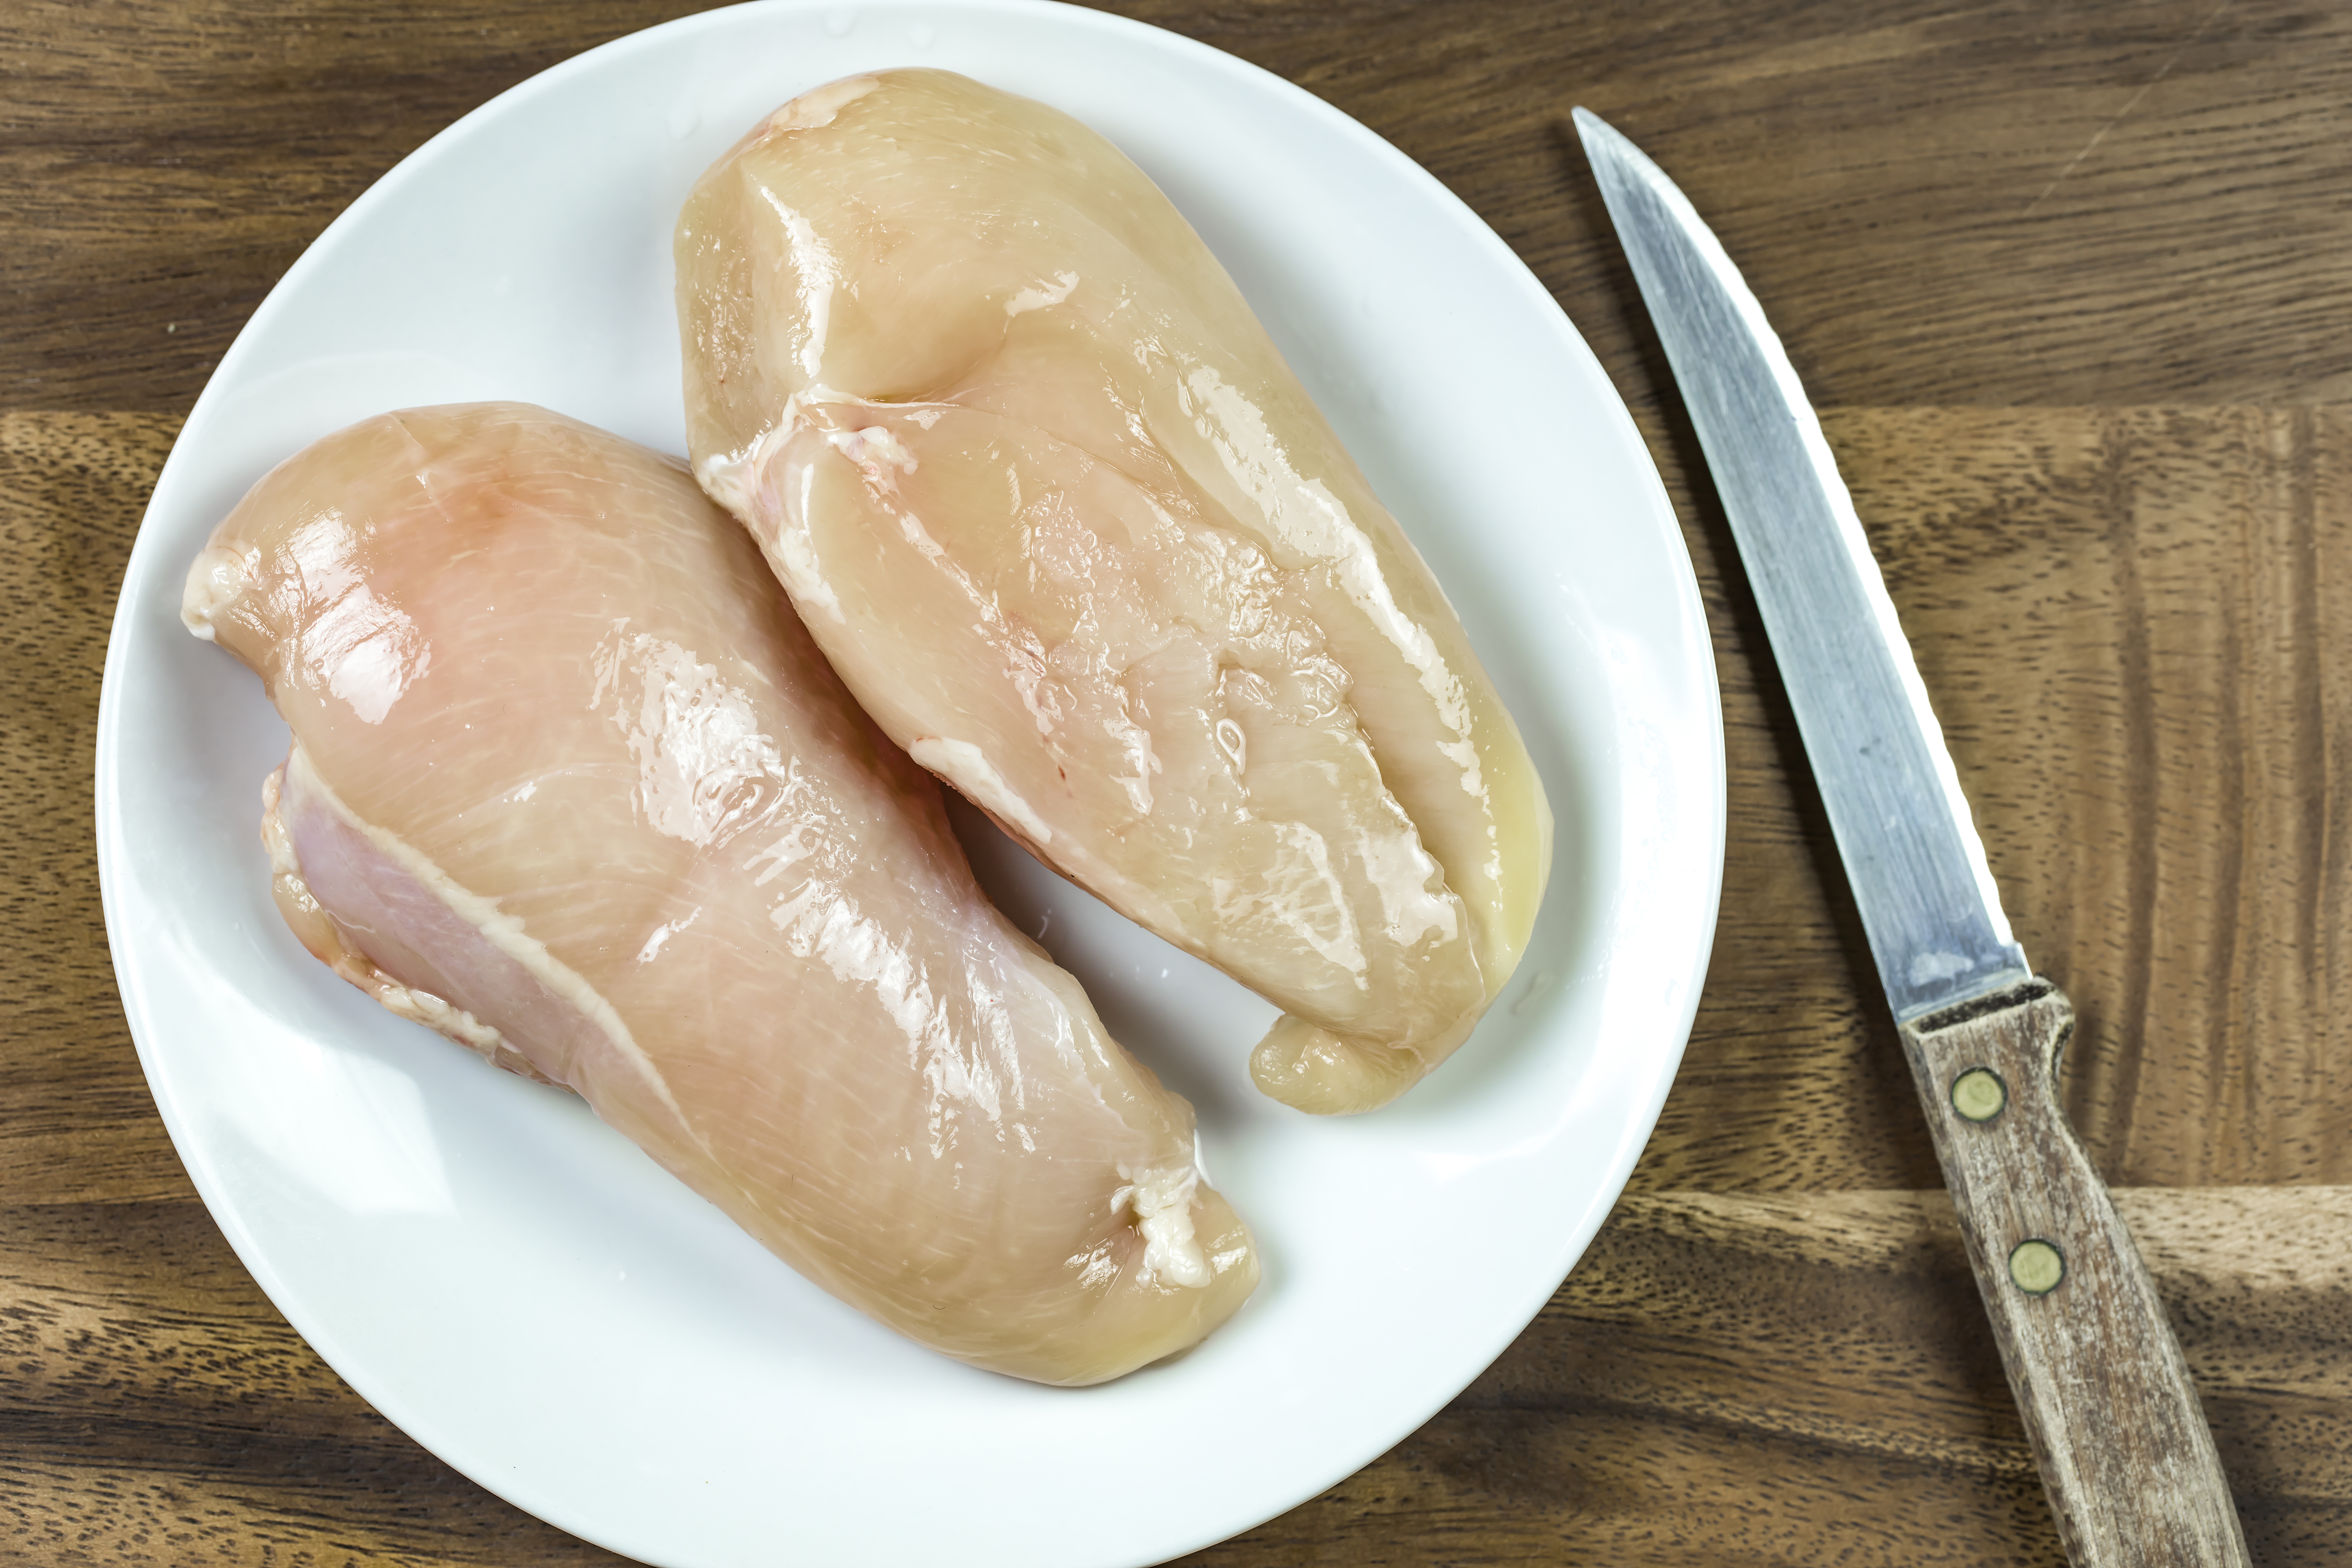 Should You Wash Your Chicken Before Eating It?